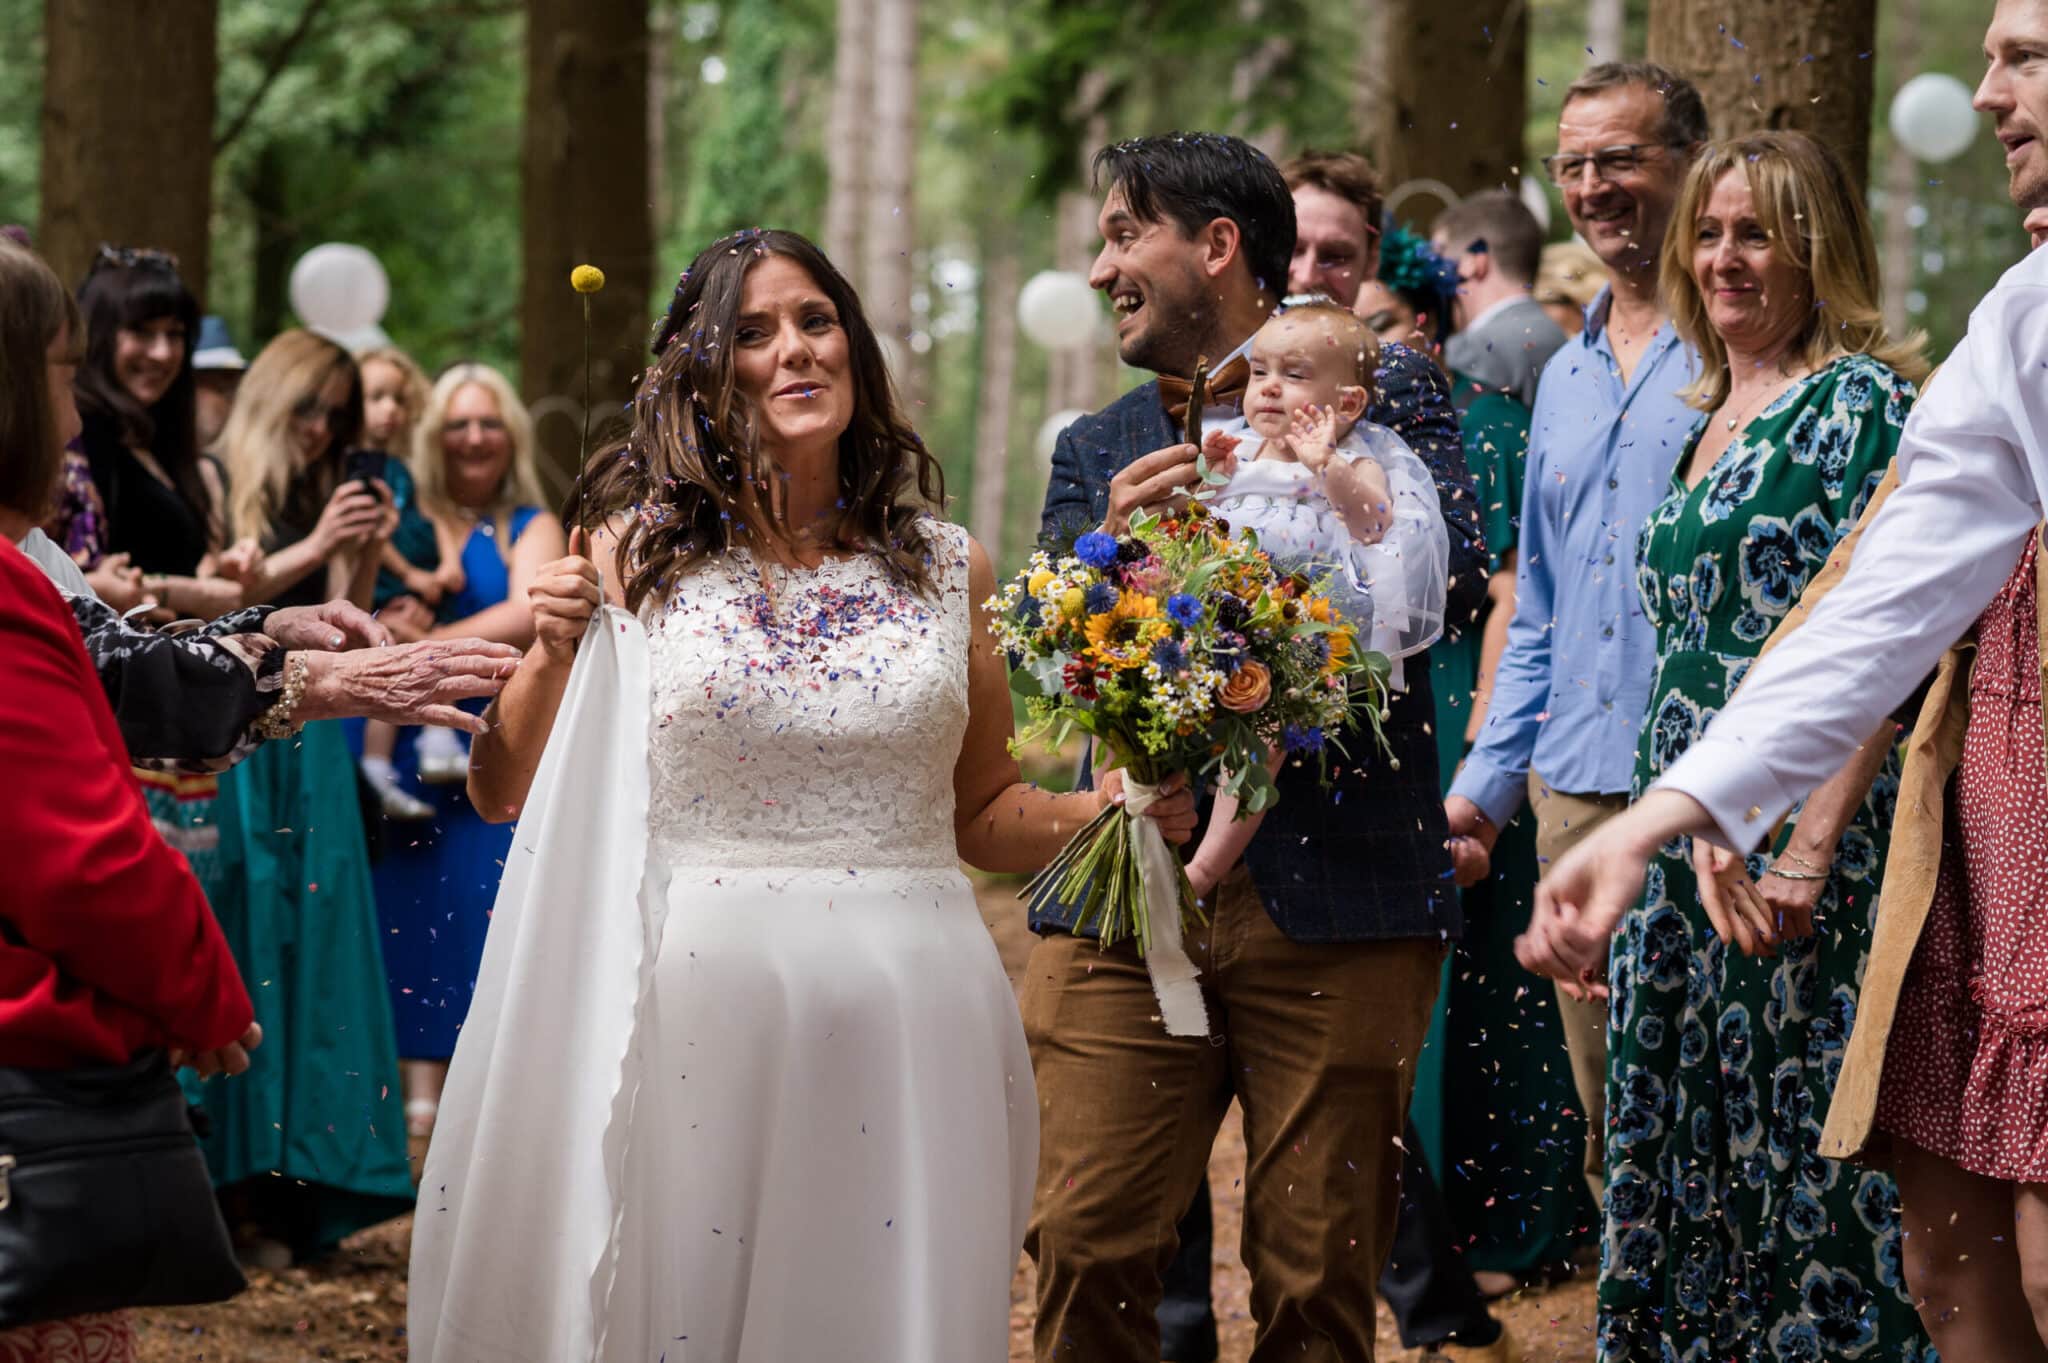 Bride and groom walk through confetti at Weddings in the Wood